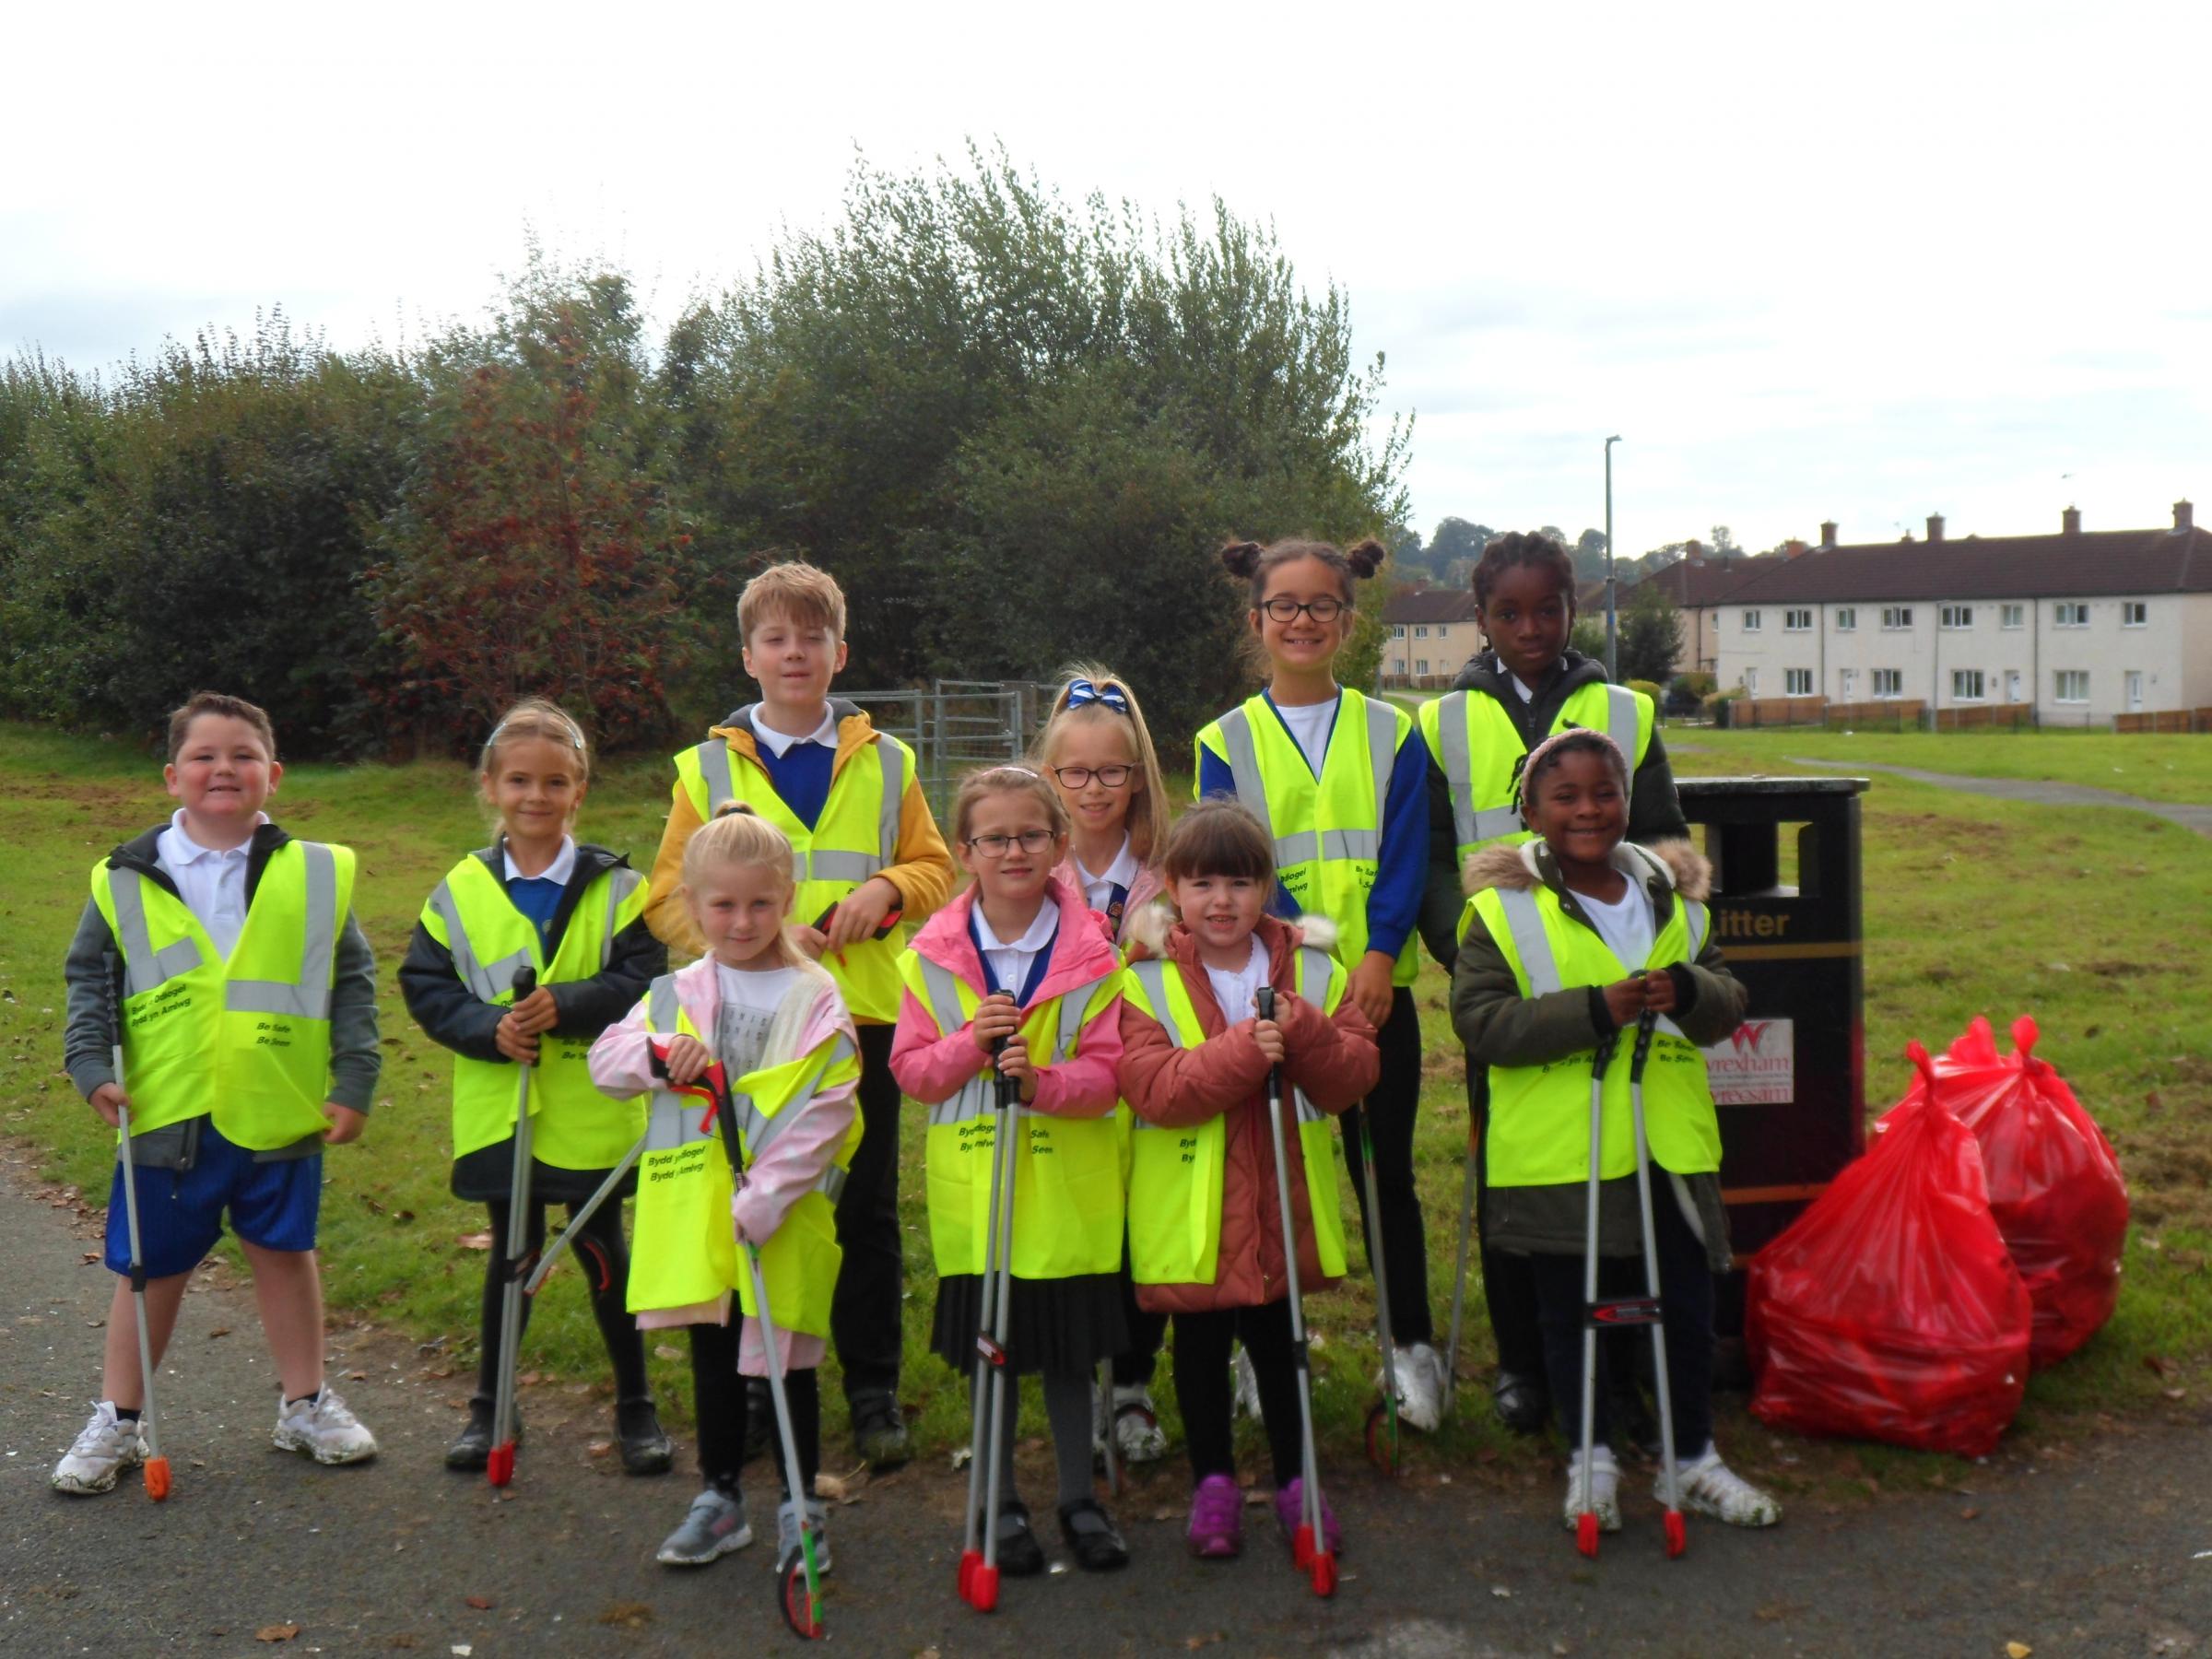 Members of the St Annes School Eco Council litter-picking.